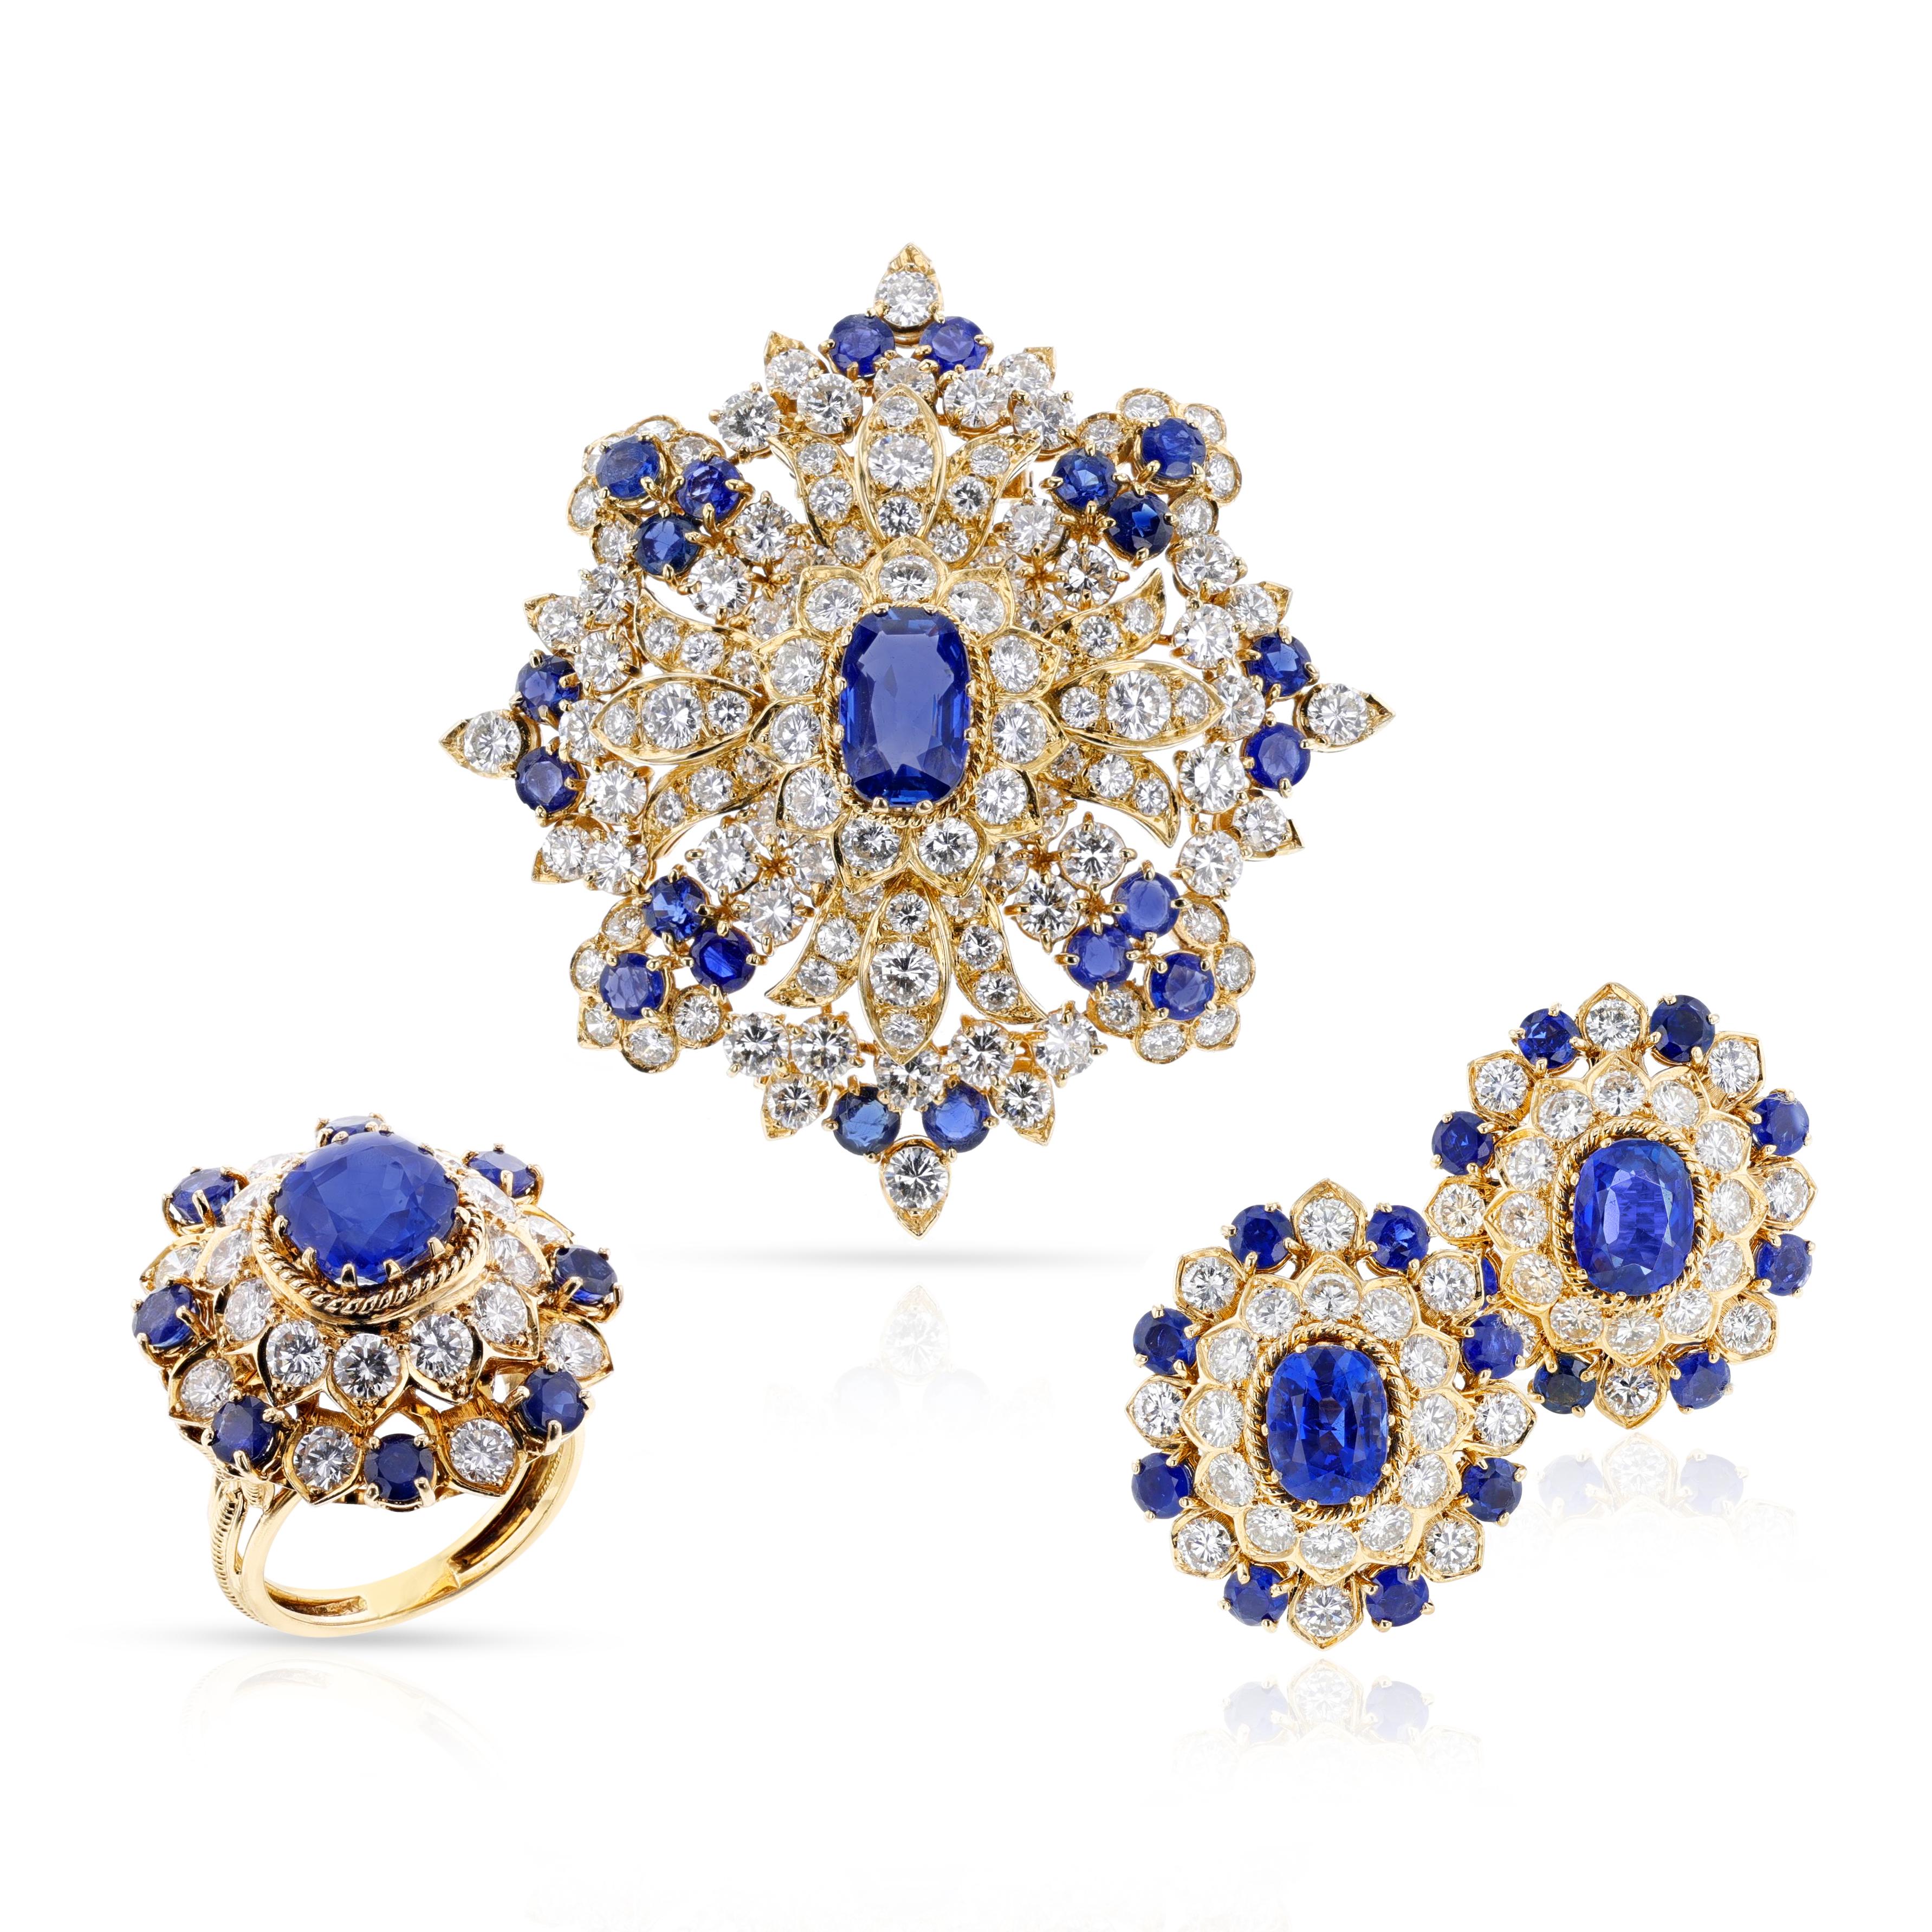 Vourakis Sapphire and Diamond Earrings, Brooch, and Ring Suite 18k In Excellent Condition For Sale In New York, NY